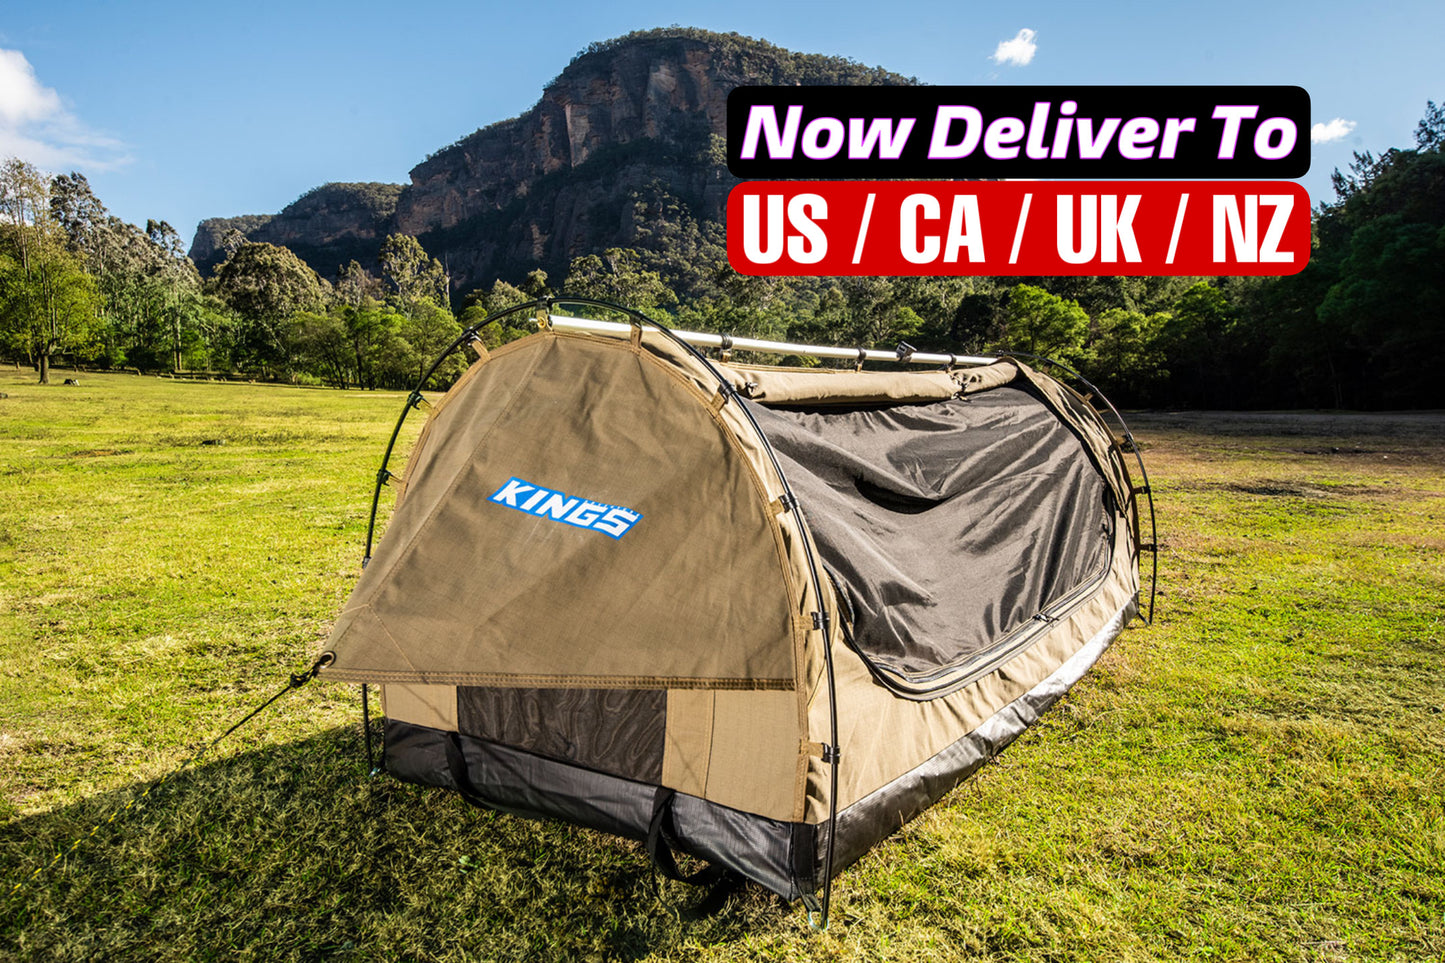 Kings Deluxe Single Swag Tent + Canvas Bag - JMS Camping Store